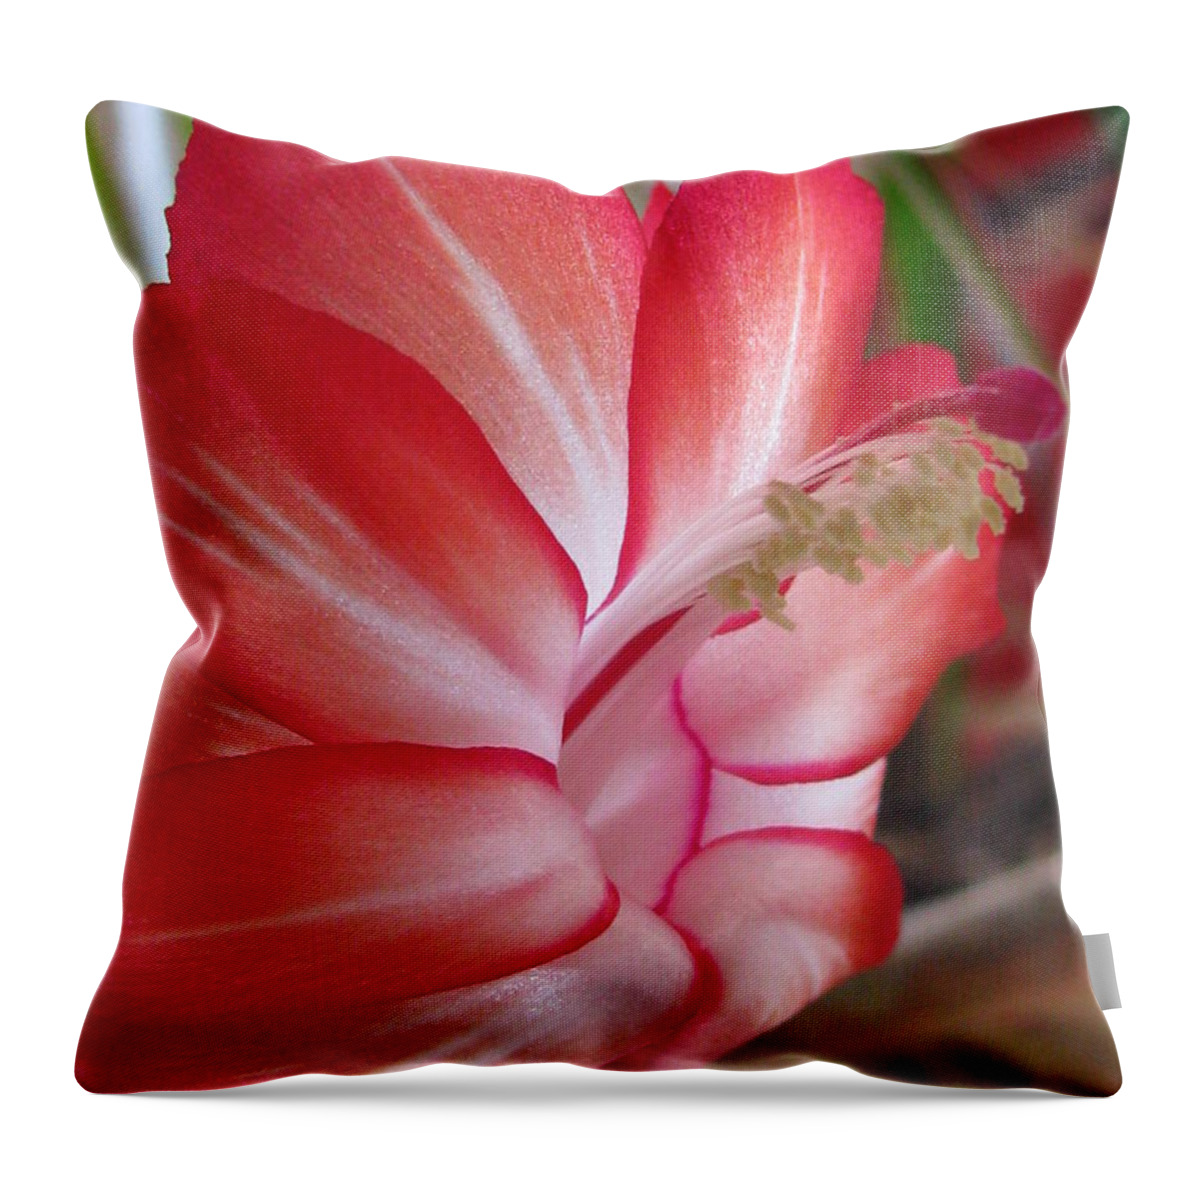 Flower Throw Pillow featuring the photograph Inventiveness Photography by Tina Marie